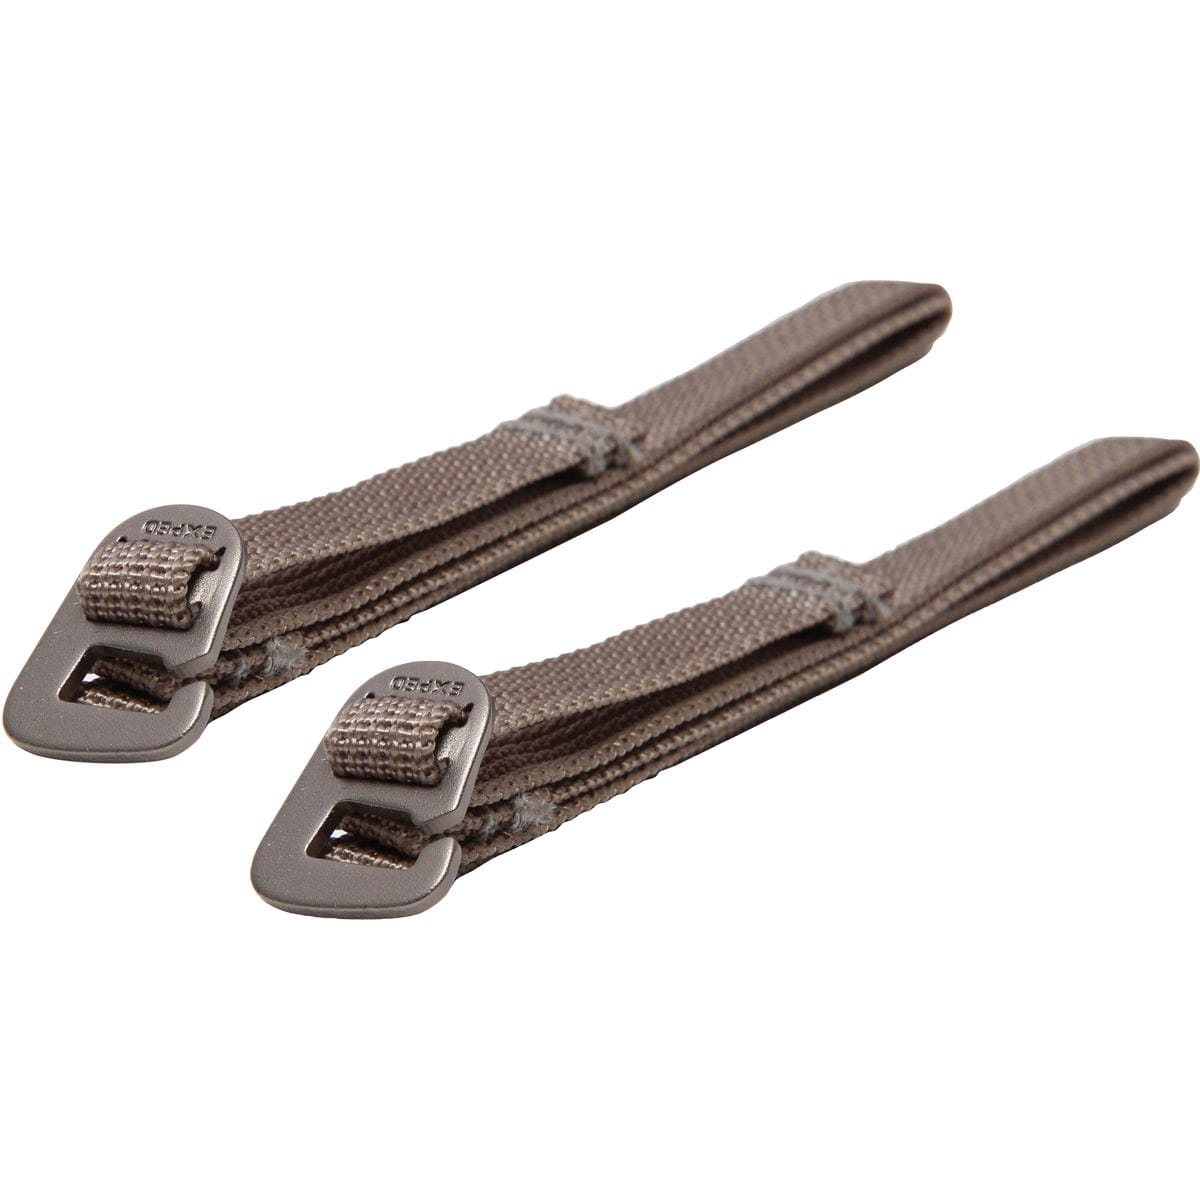 https://outdoortrends2.shop-cdn.com/media/image/a7/13/75/exped-accessory-strap-ul-10-mm-60-cm-spanngurte-ep-20101440.jpg